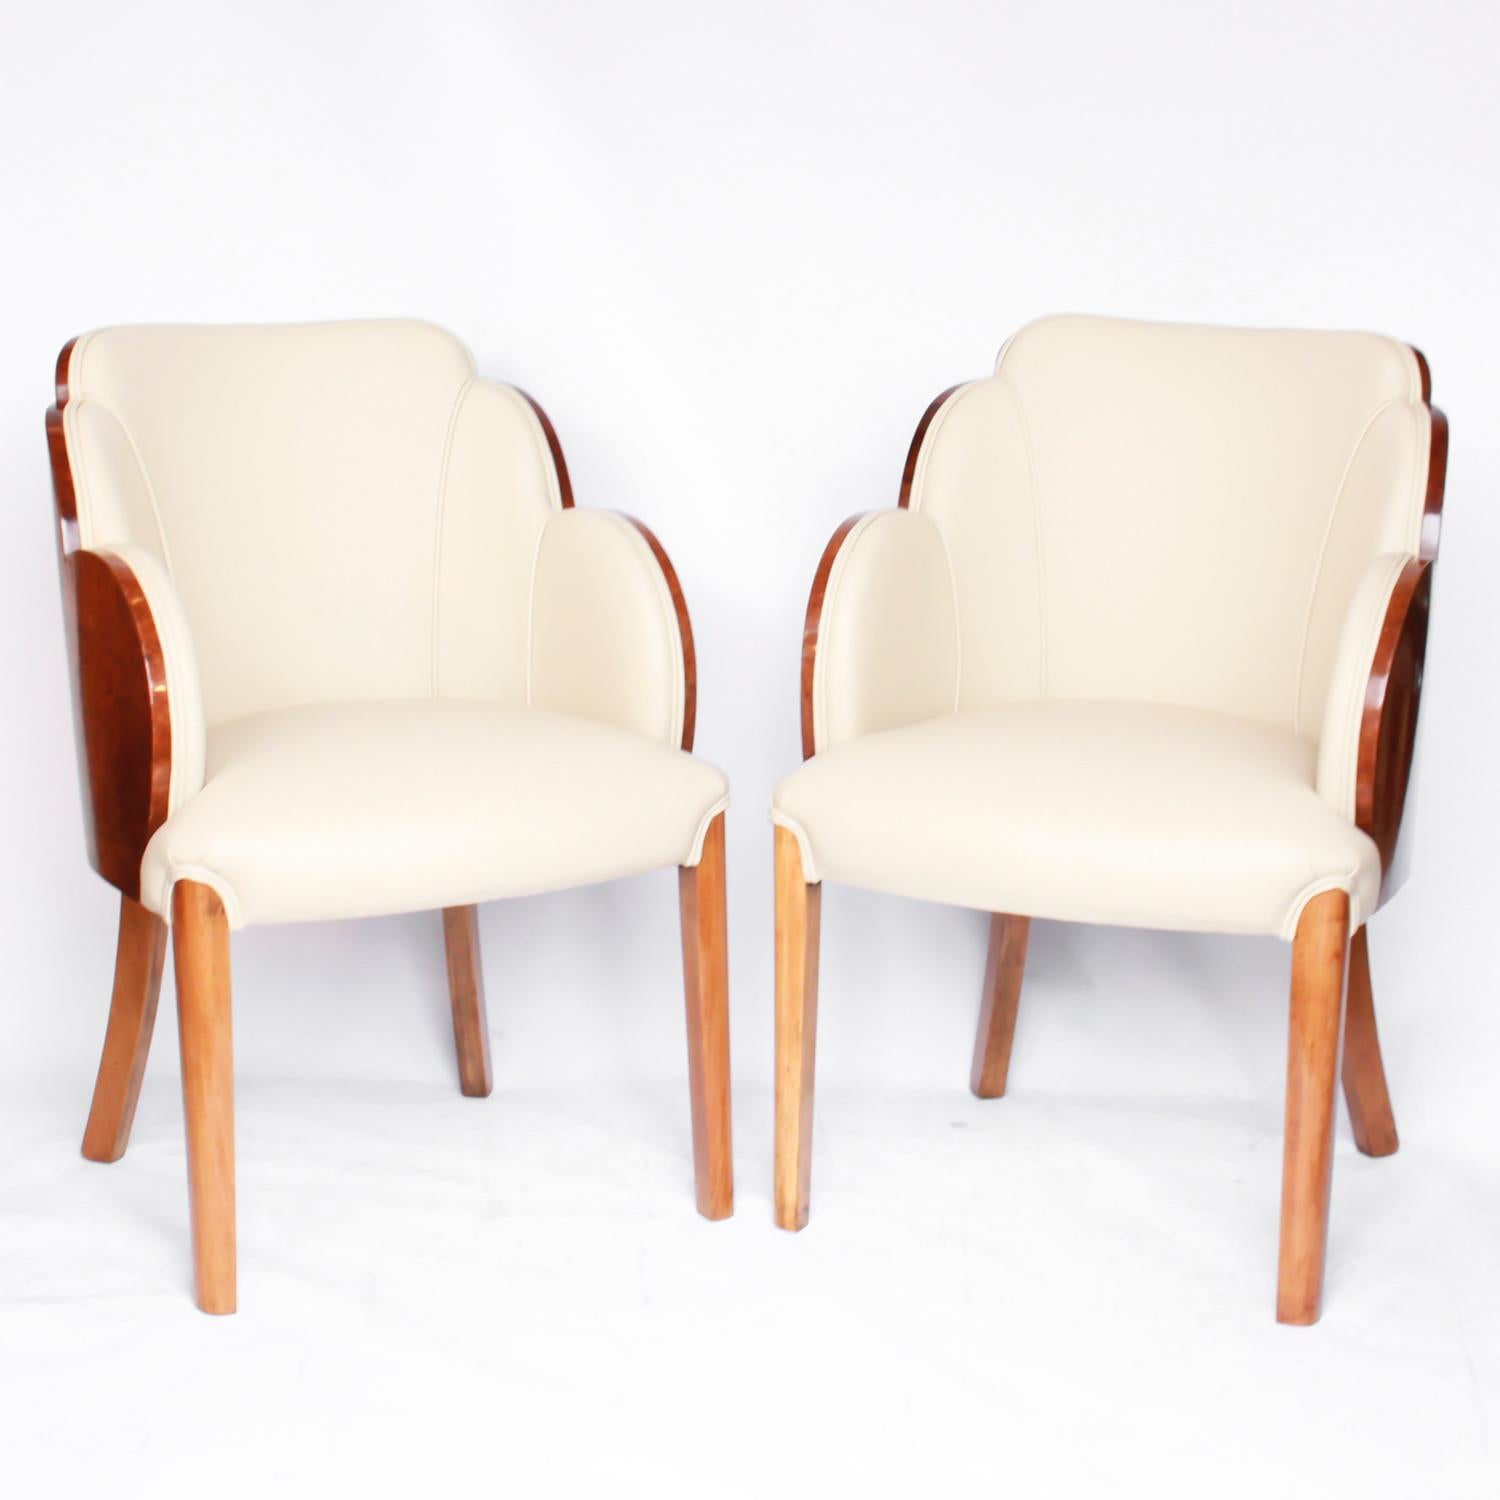 A pair of Art Deco cloud back armchairs, re-upholstered in cream leather and Alcantara suede.

Dimensions: H 85cm, W 57cm, Seat H 50cm, Seat D 50cm

Origin: English

Date: circa 1935

Item No: 1410193